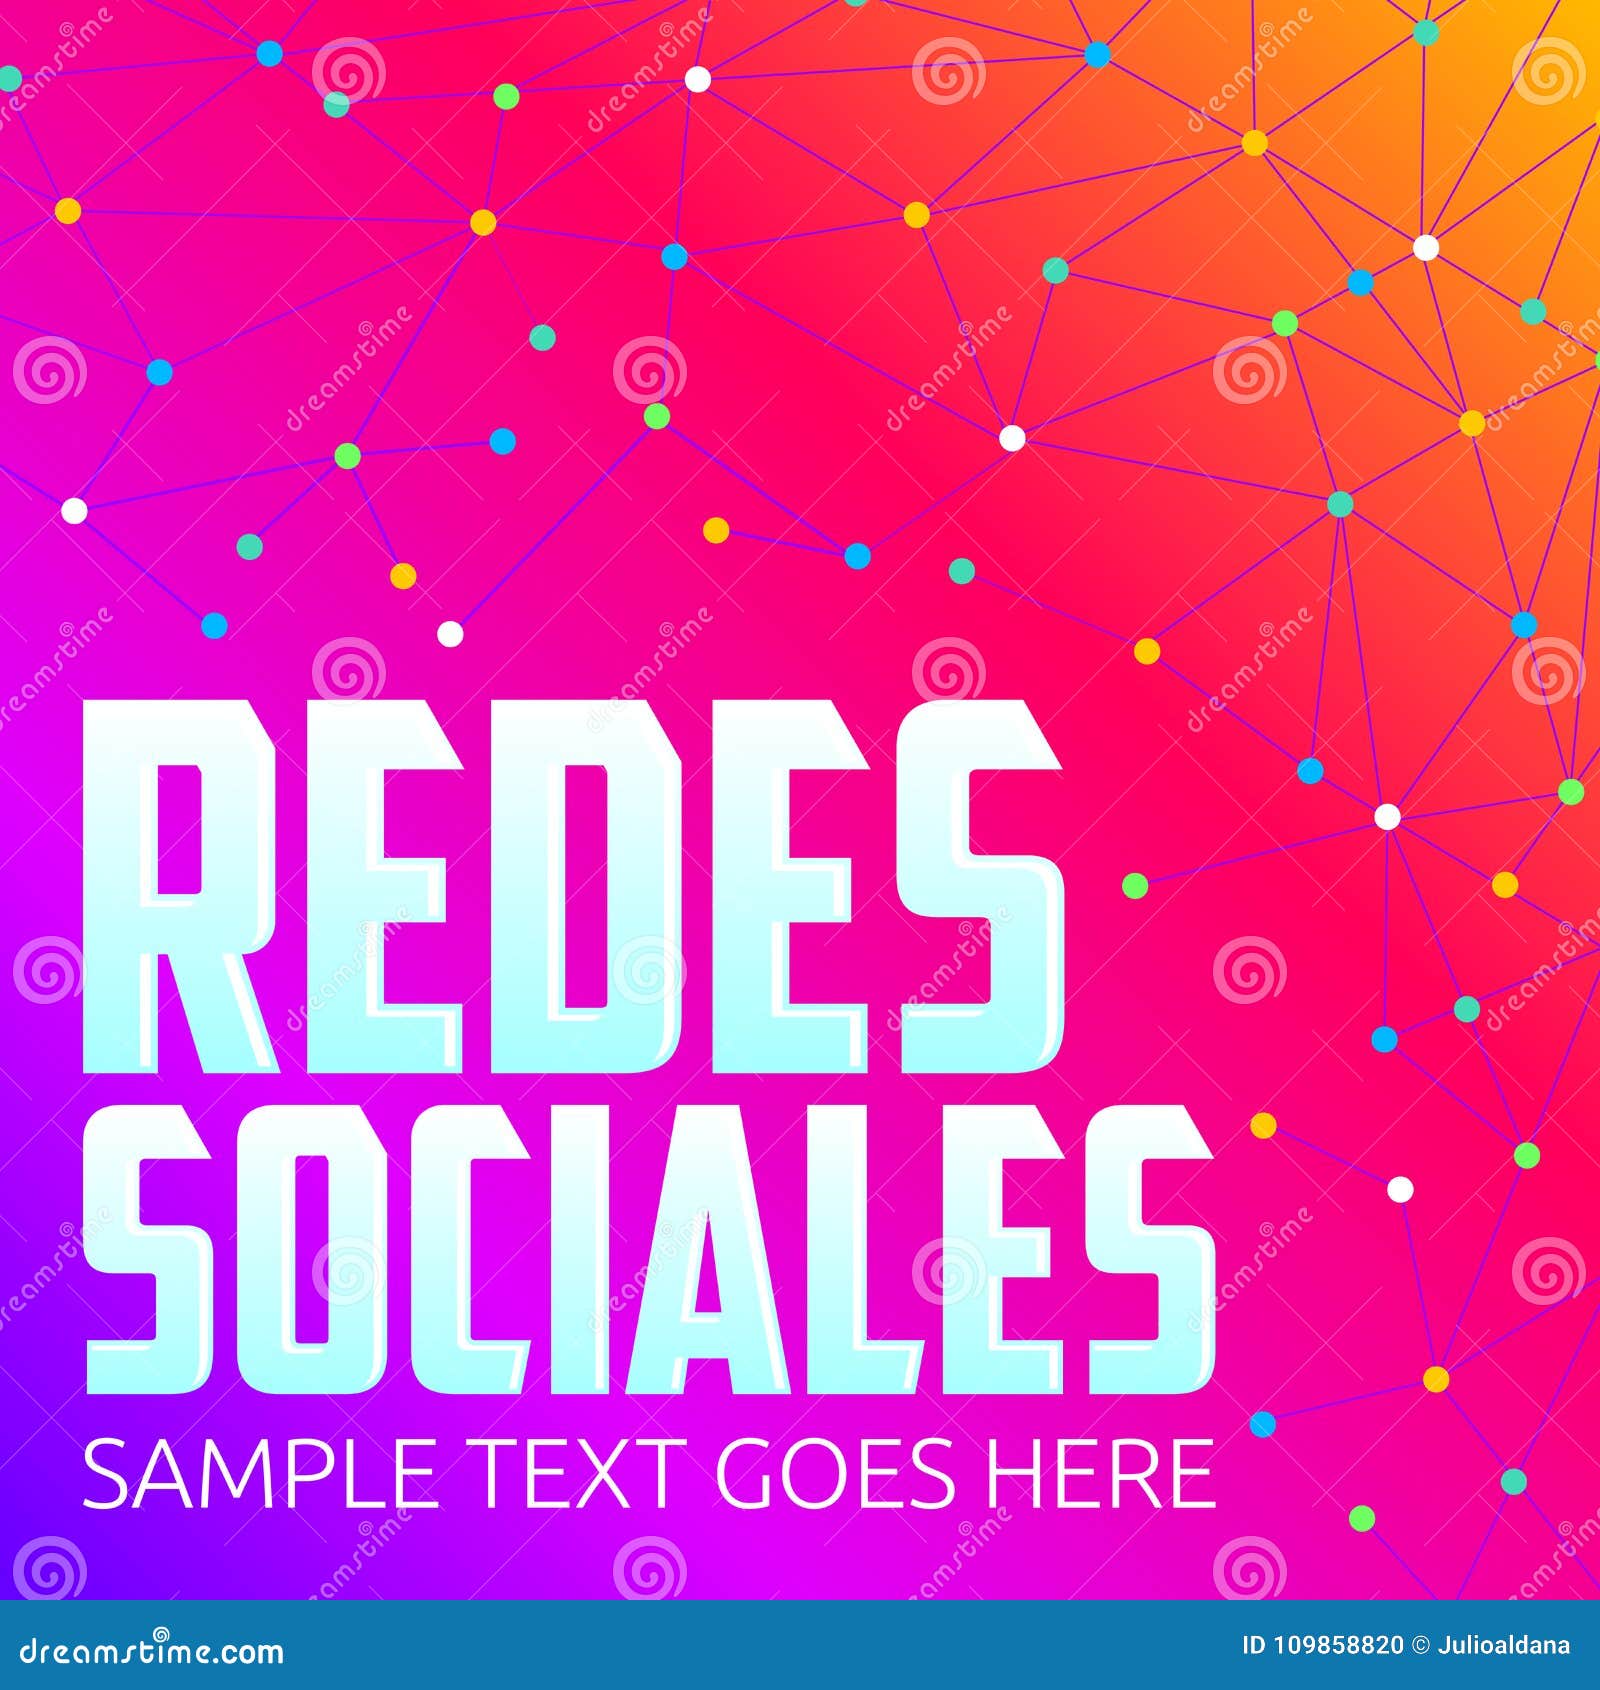 redes sociales, social networks spanish text